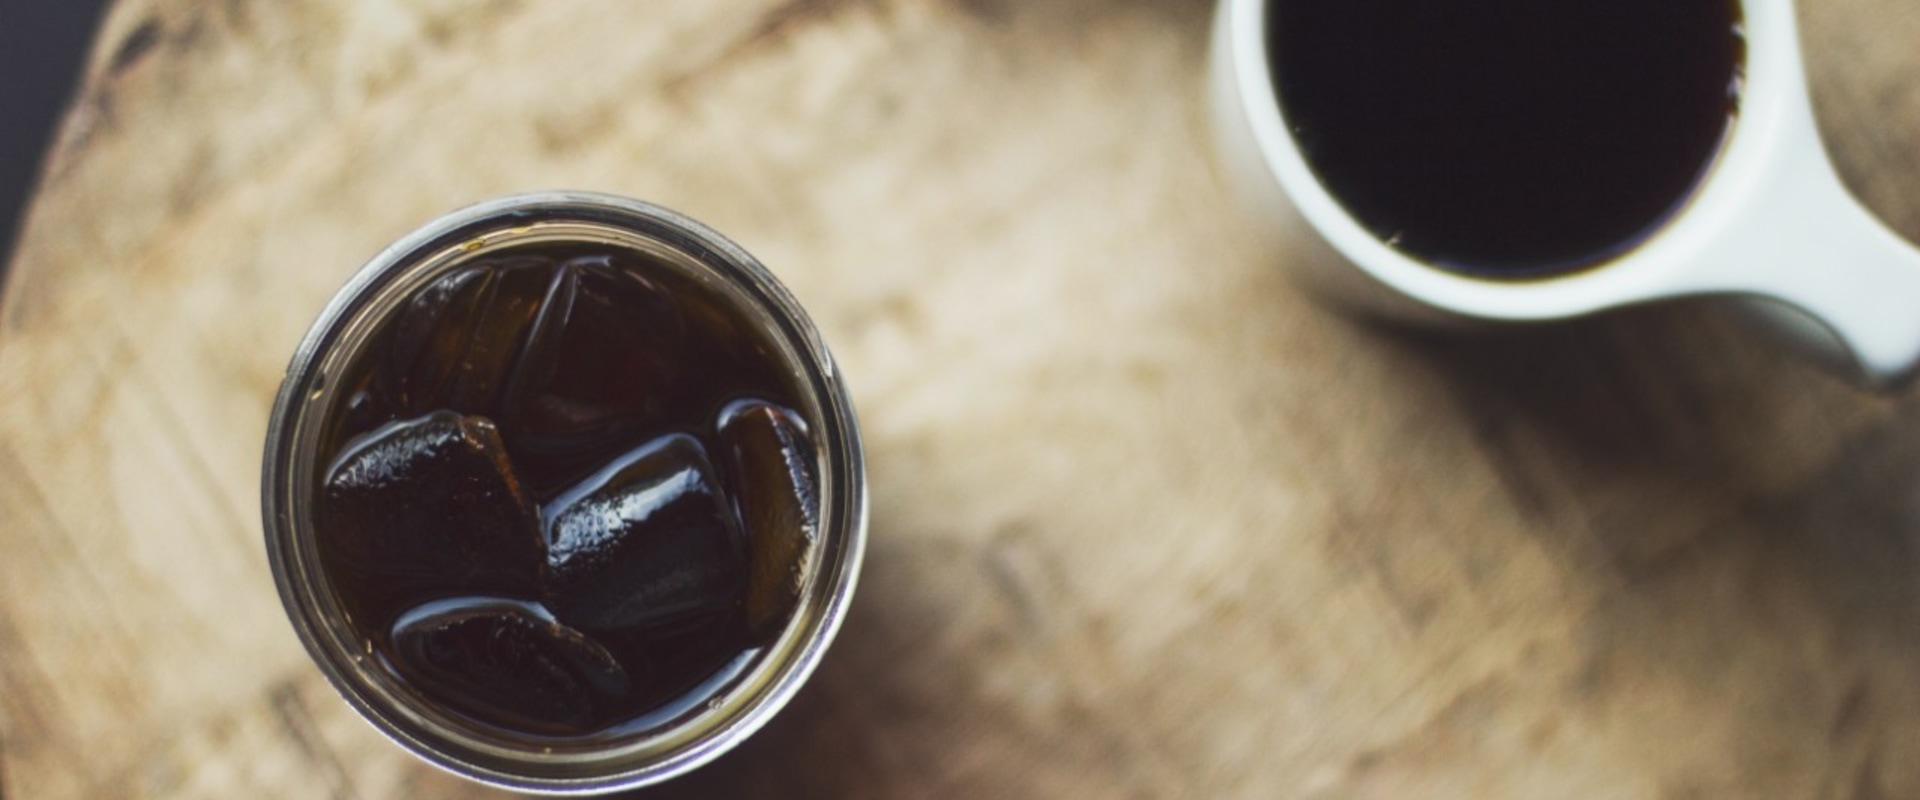 How much caffeine is in cold brew vs nitro?